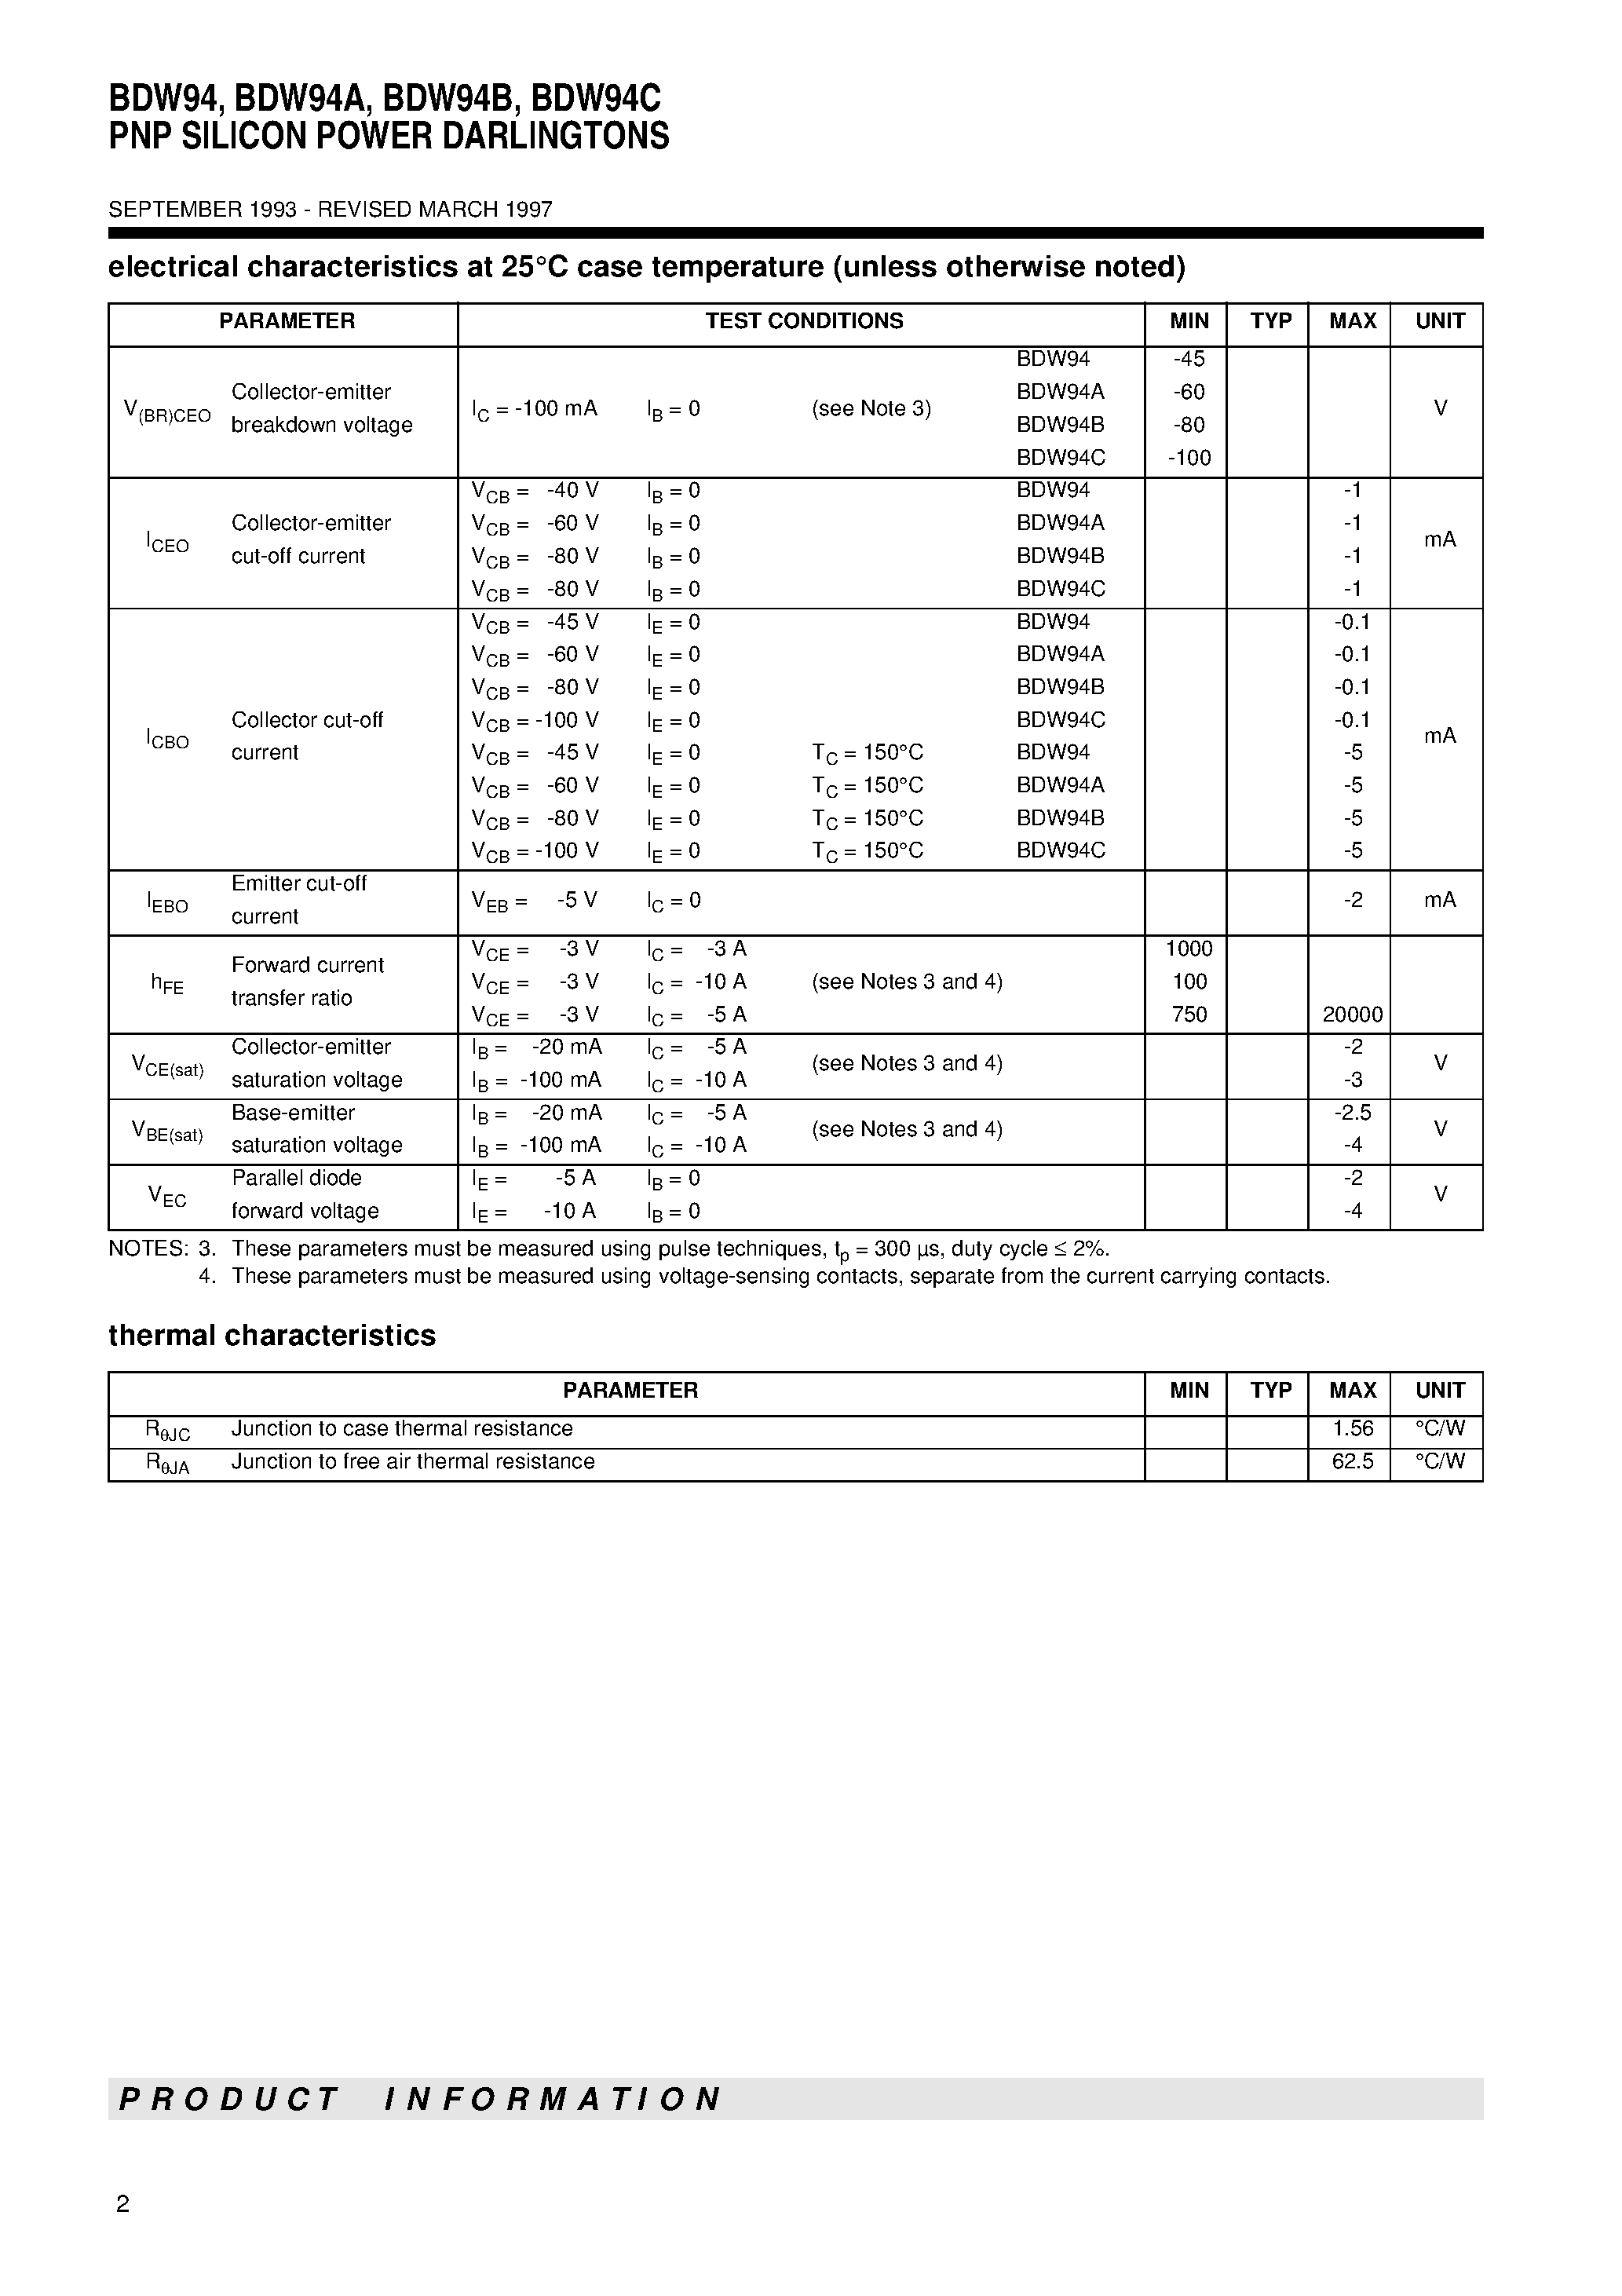 Datasheet BDW94A - PNP SILICON POWER DARLINGTONS page 2